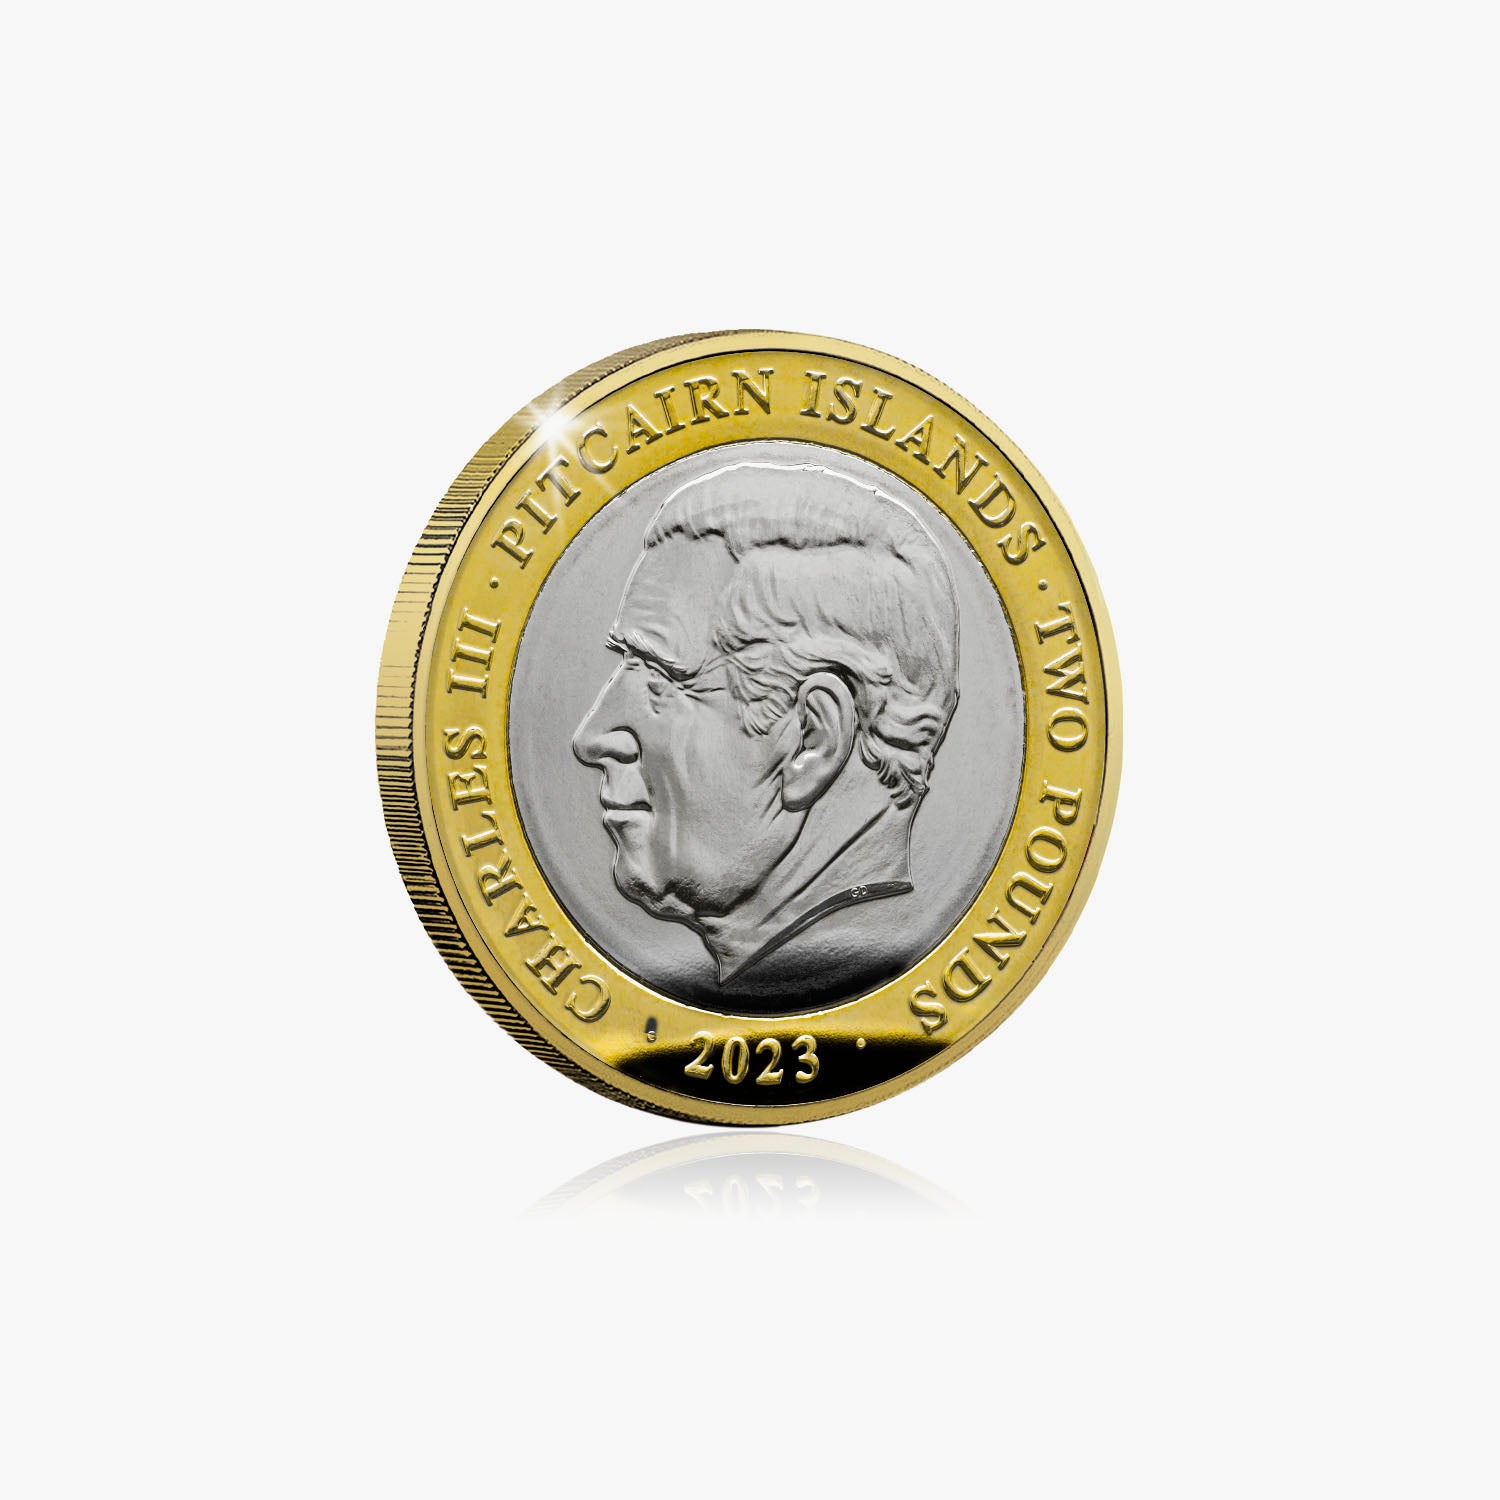 The World of Peter Rabbit 2023 £2 BU Coin